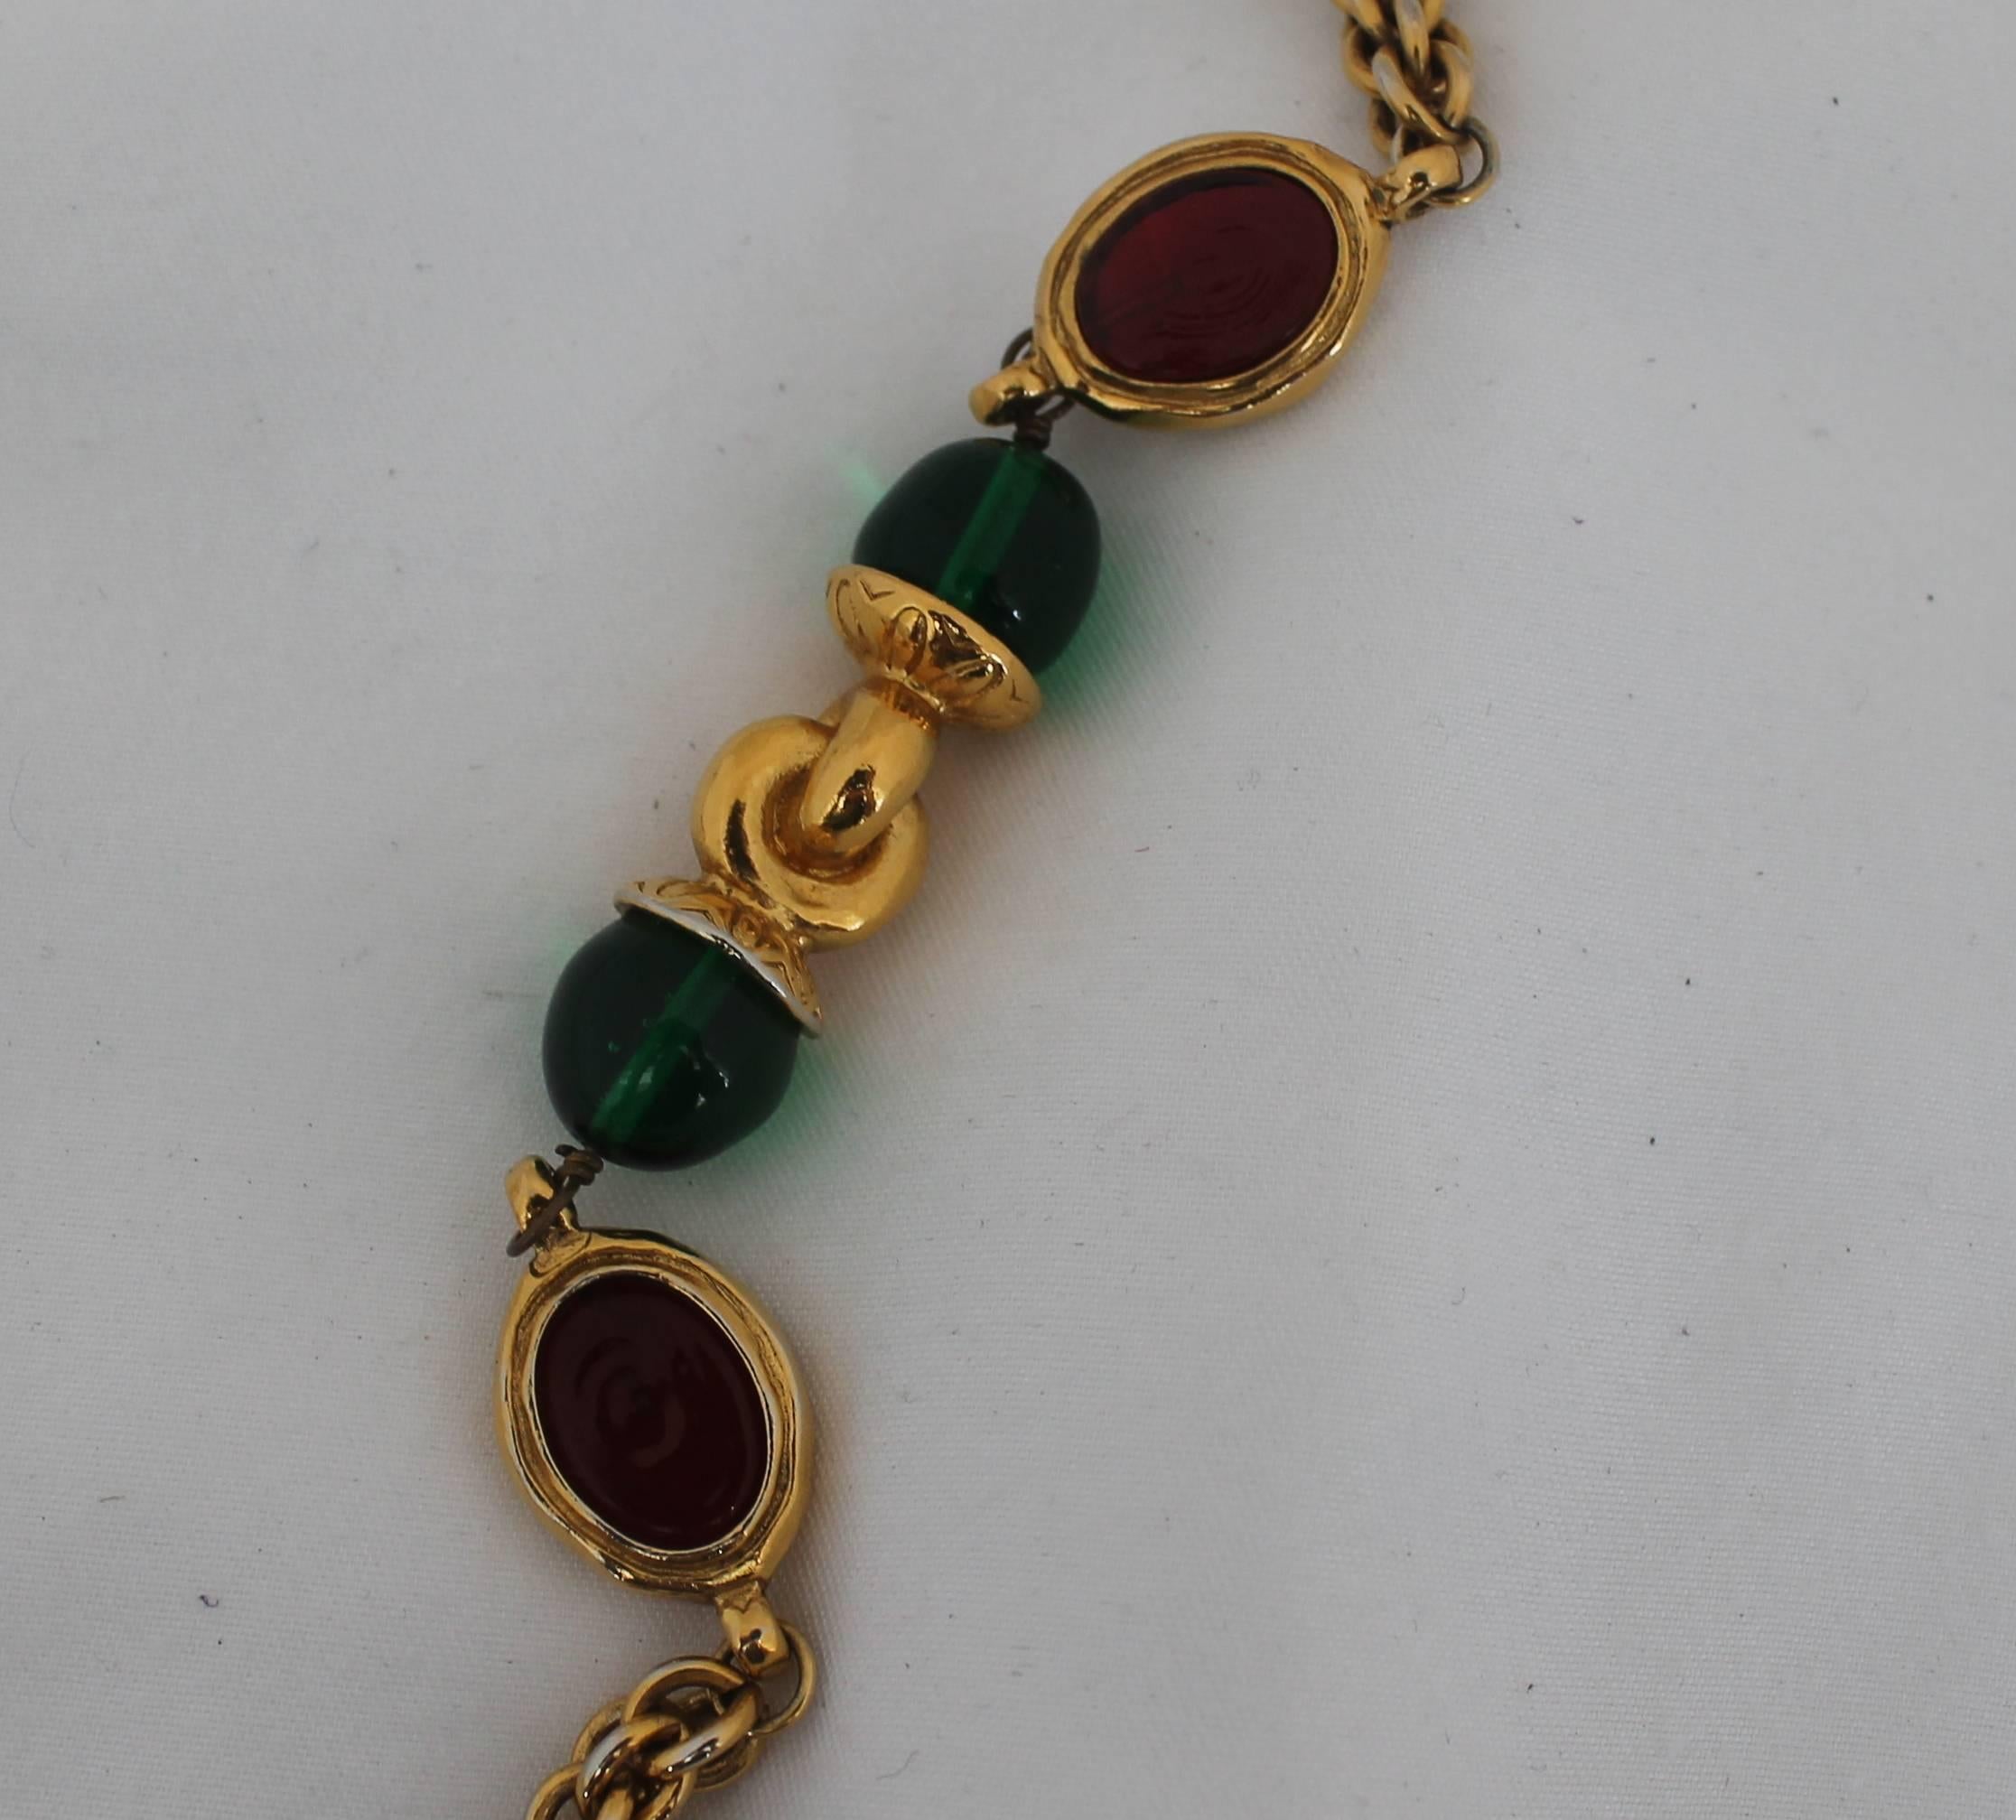 Chanel Gold and Red and Green Gripoix Necklace - circa 1970s. This Chanel necklace is made of gold links which are intertwined into a cord. There are red disks that are outlined in gold and green spheres with gold in between them. It is in good